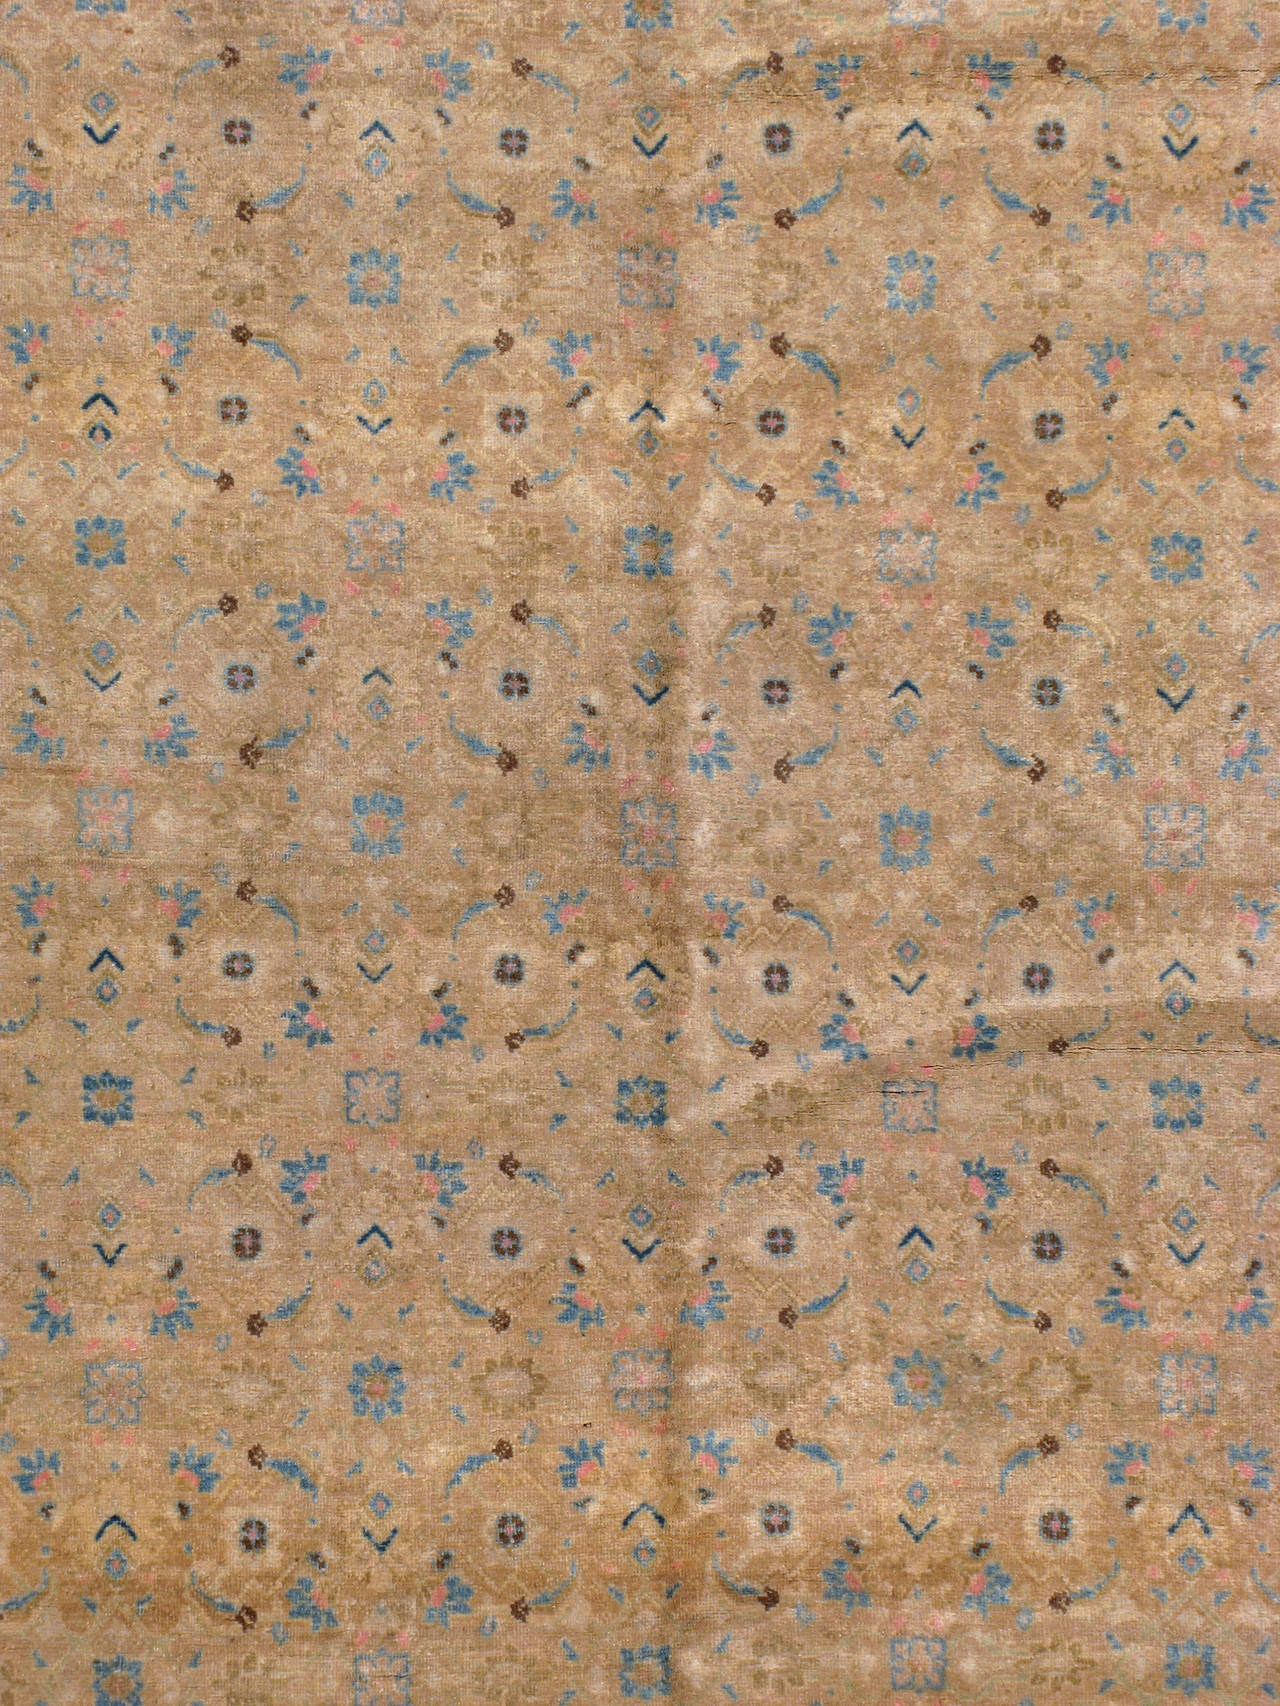 A second quarter, Mid-Century Persian Mahal antique washed carpet. Mahal carpets are found with both tribal and curvilinear motifs. This attribute derives from the unique position of the city of Mahallat, which is between the cities of Arak and